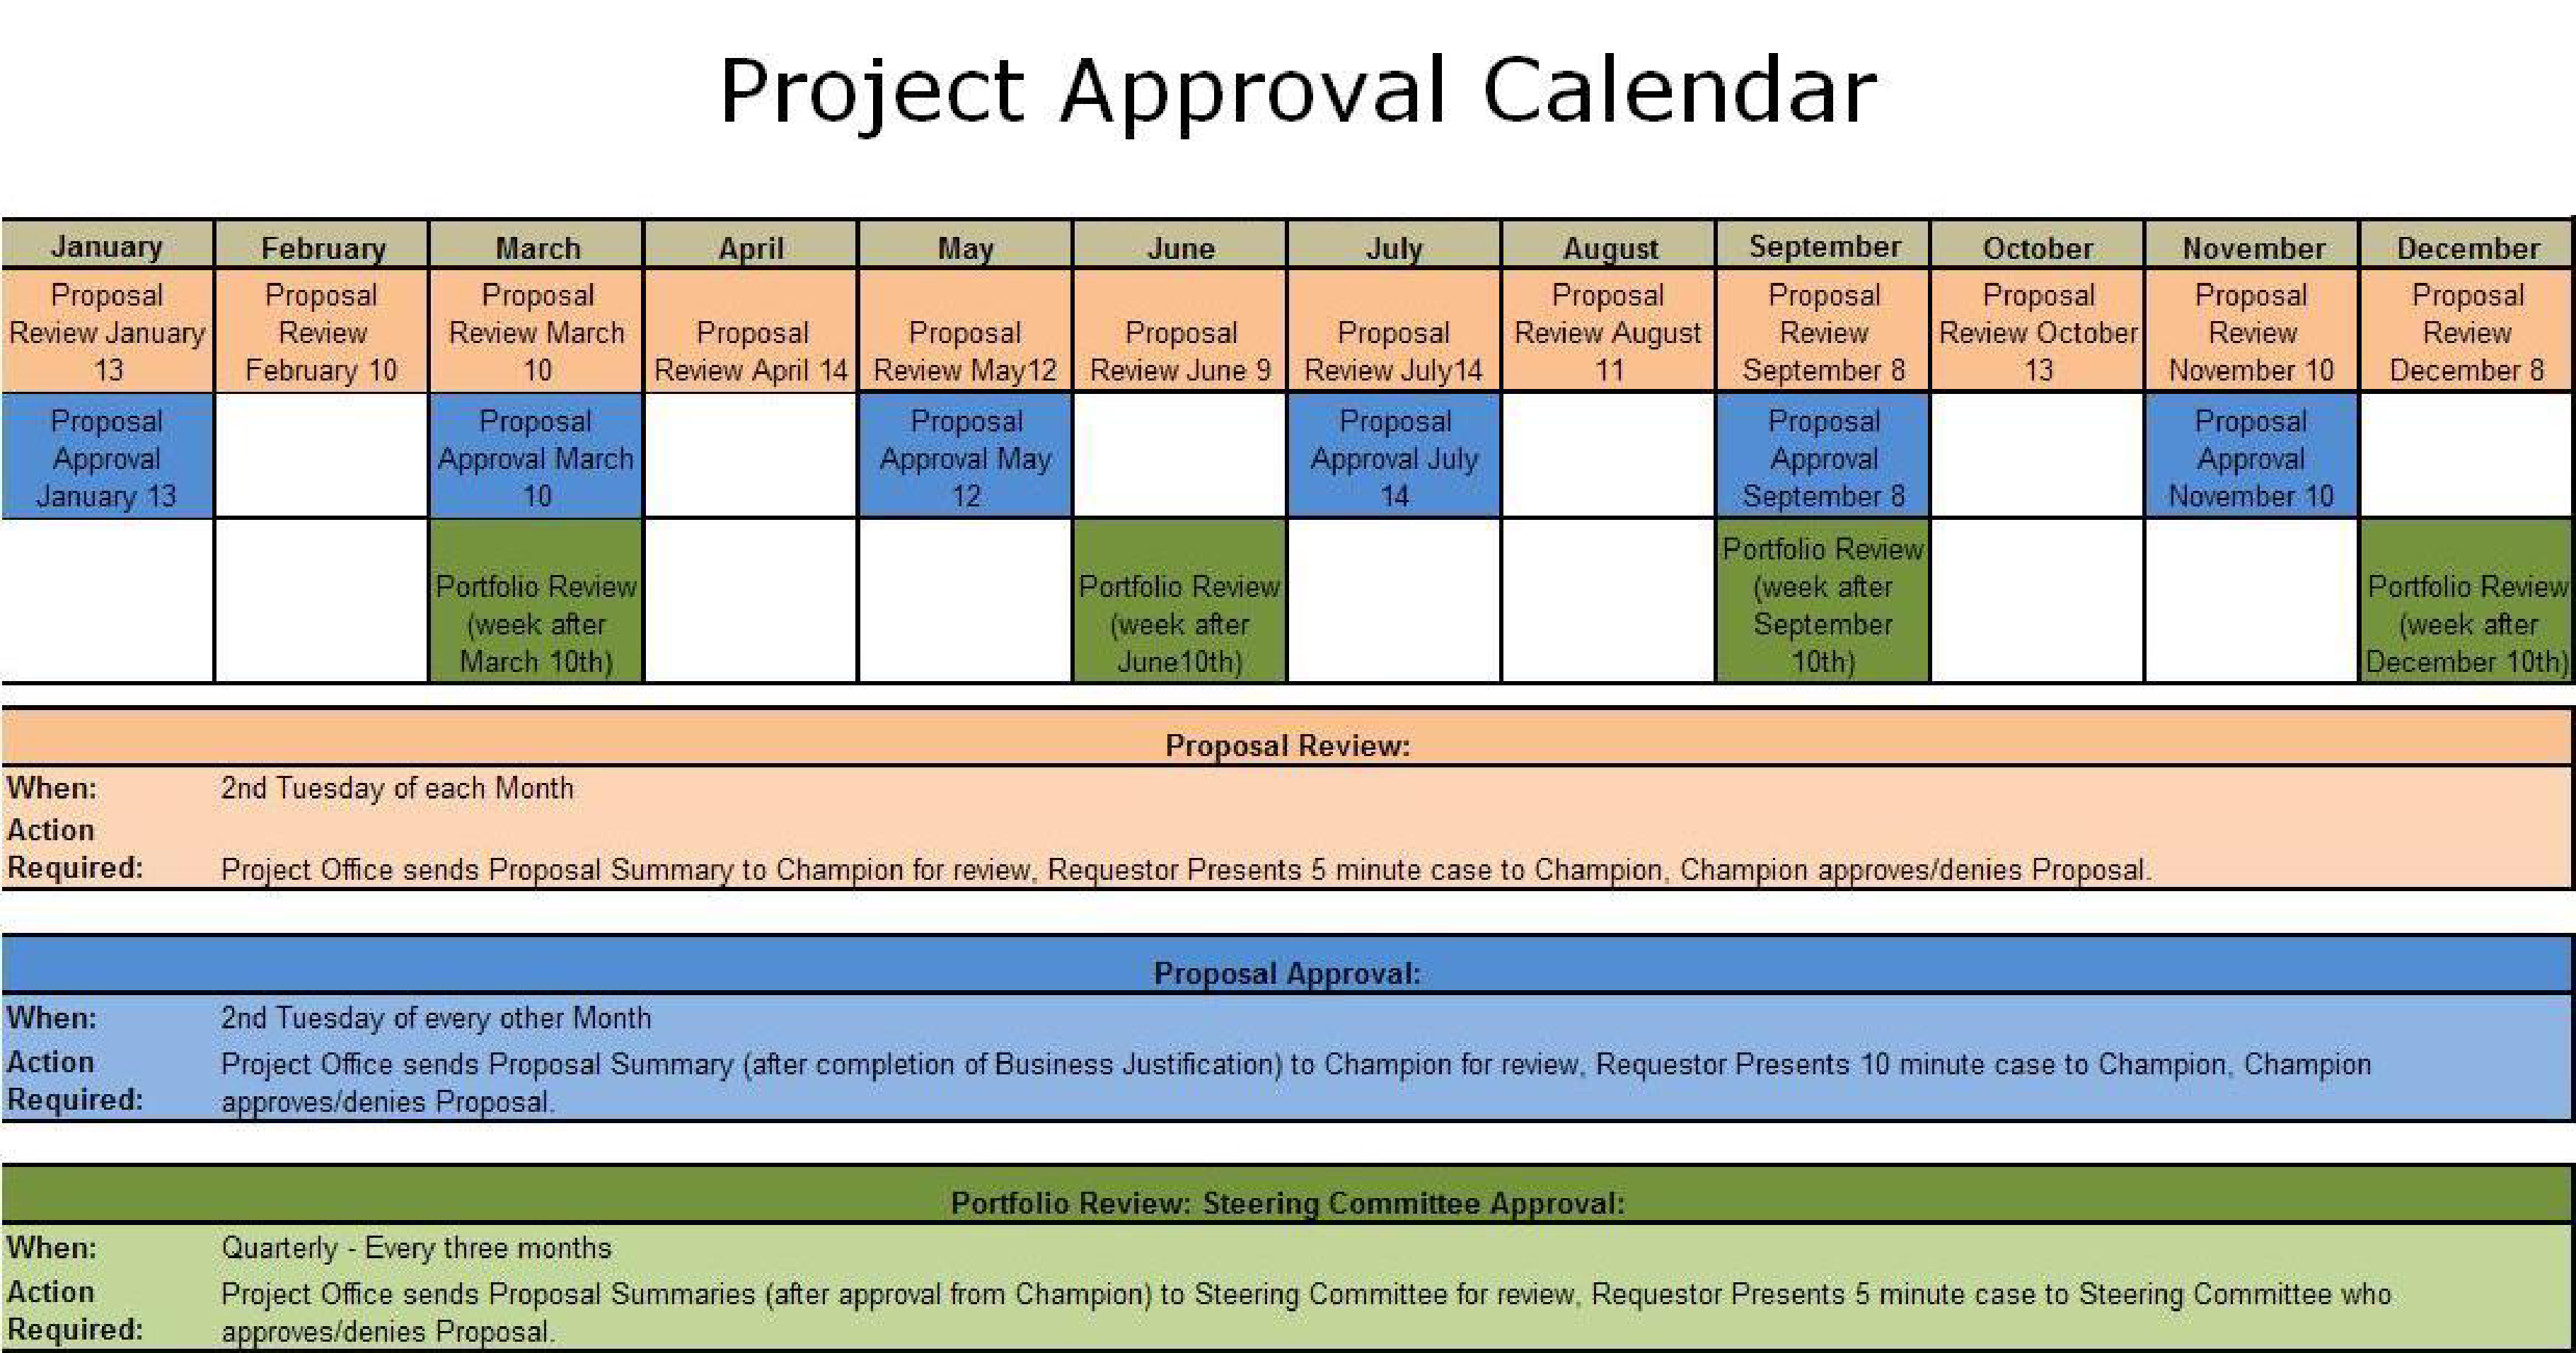 Project Approval Calendar 模板